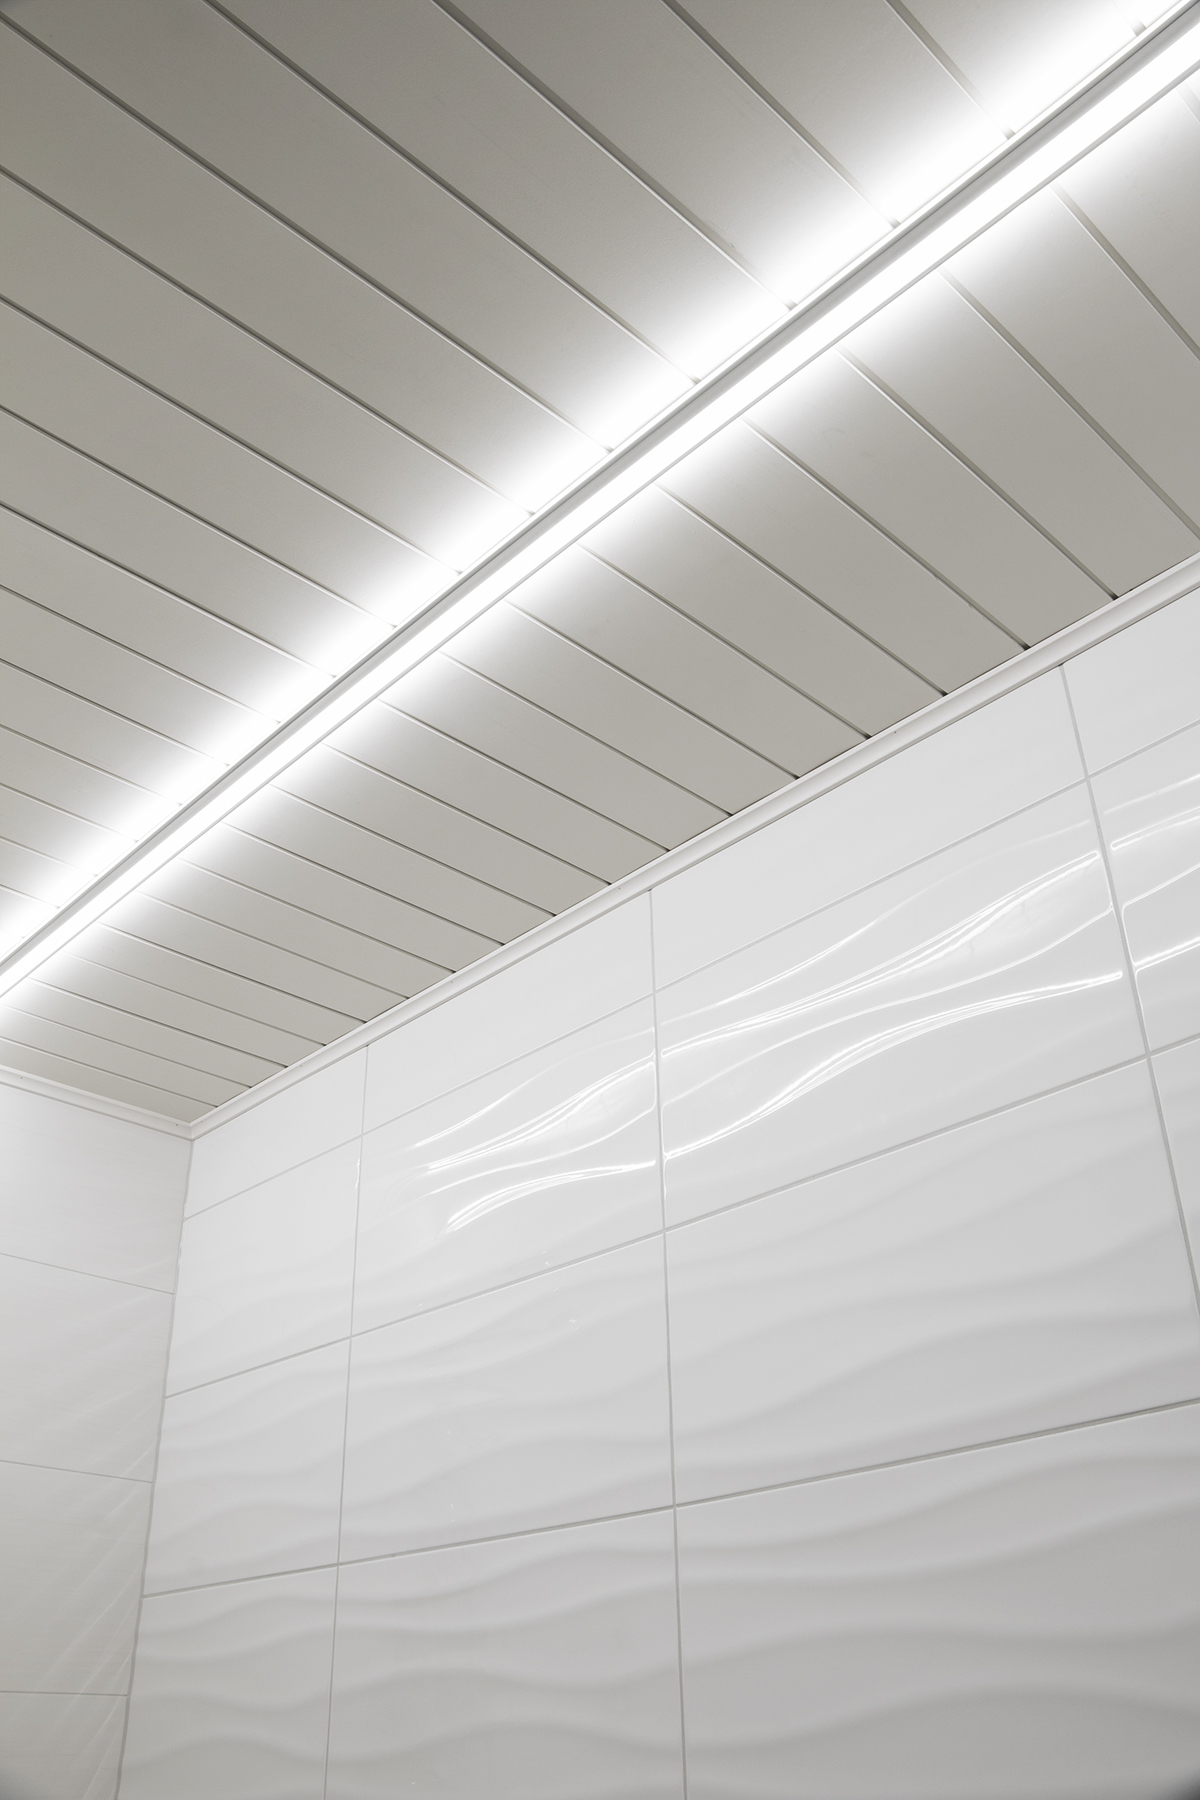 Bathroom lighting can be implemented in an innovative way with a profile